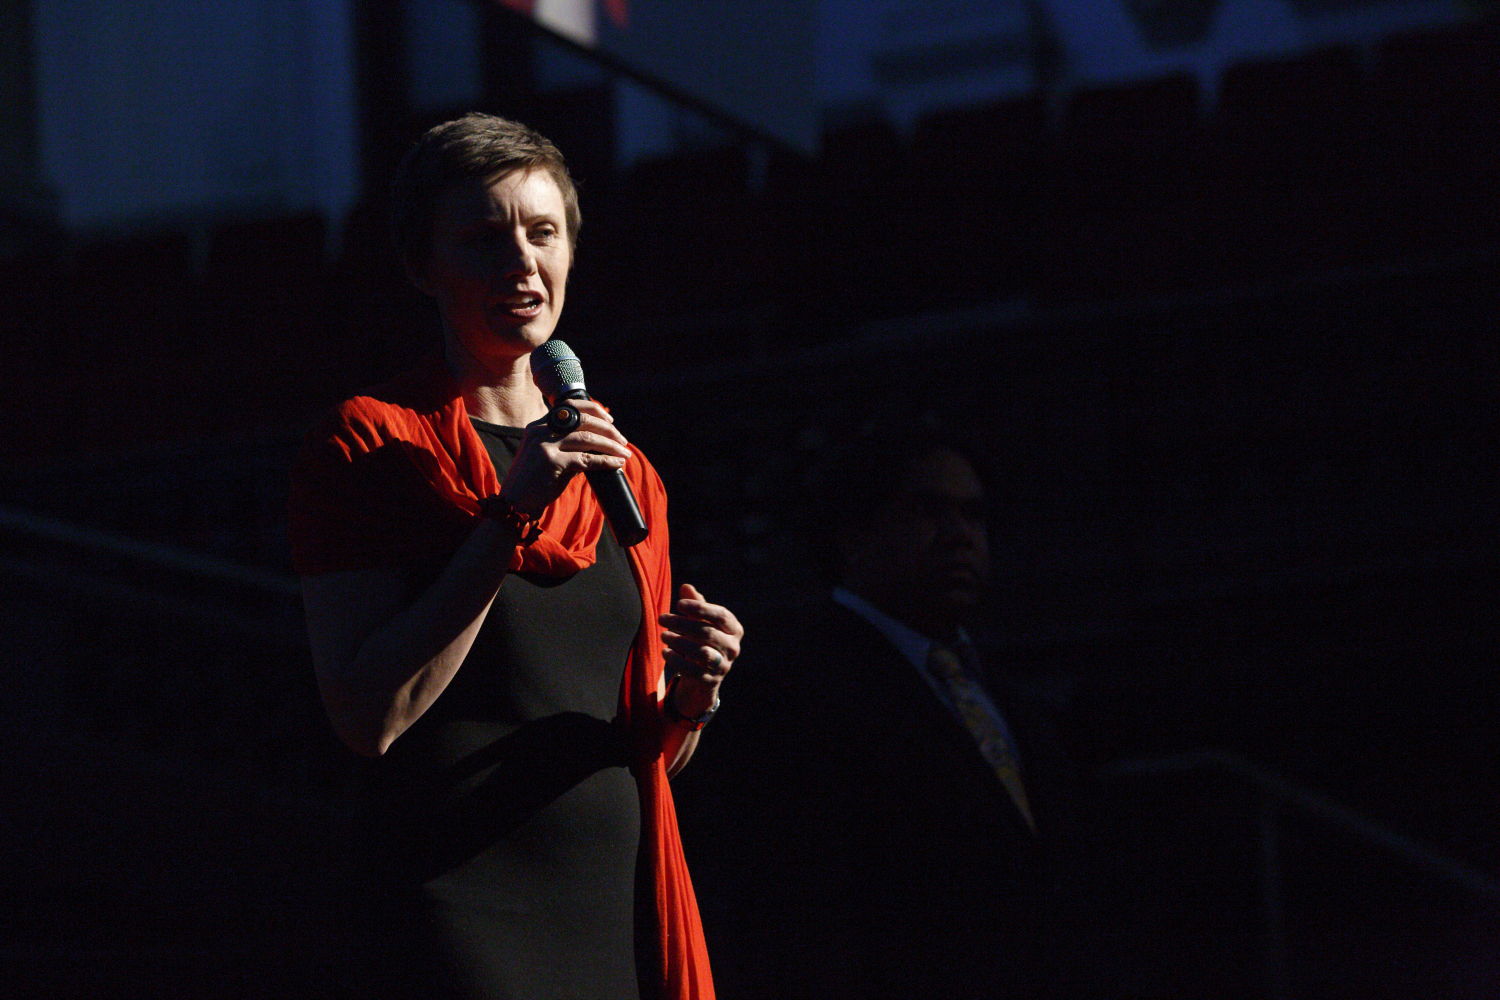 Rebecca Scott, co-founder and CEO of STREAT, standing on stage in a red top holding a microphone